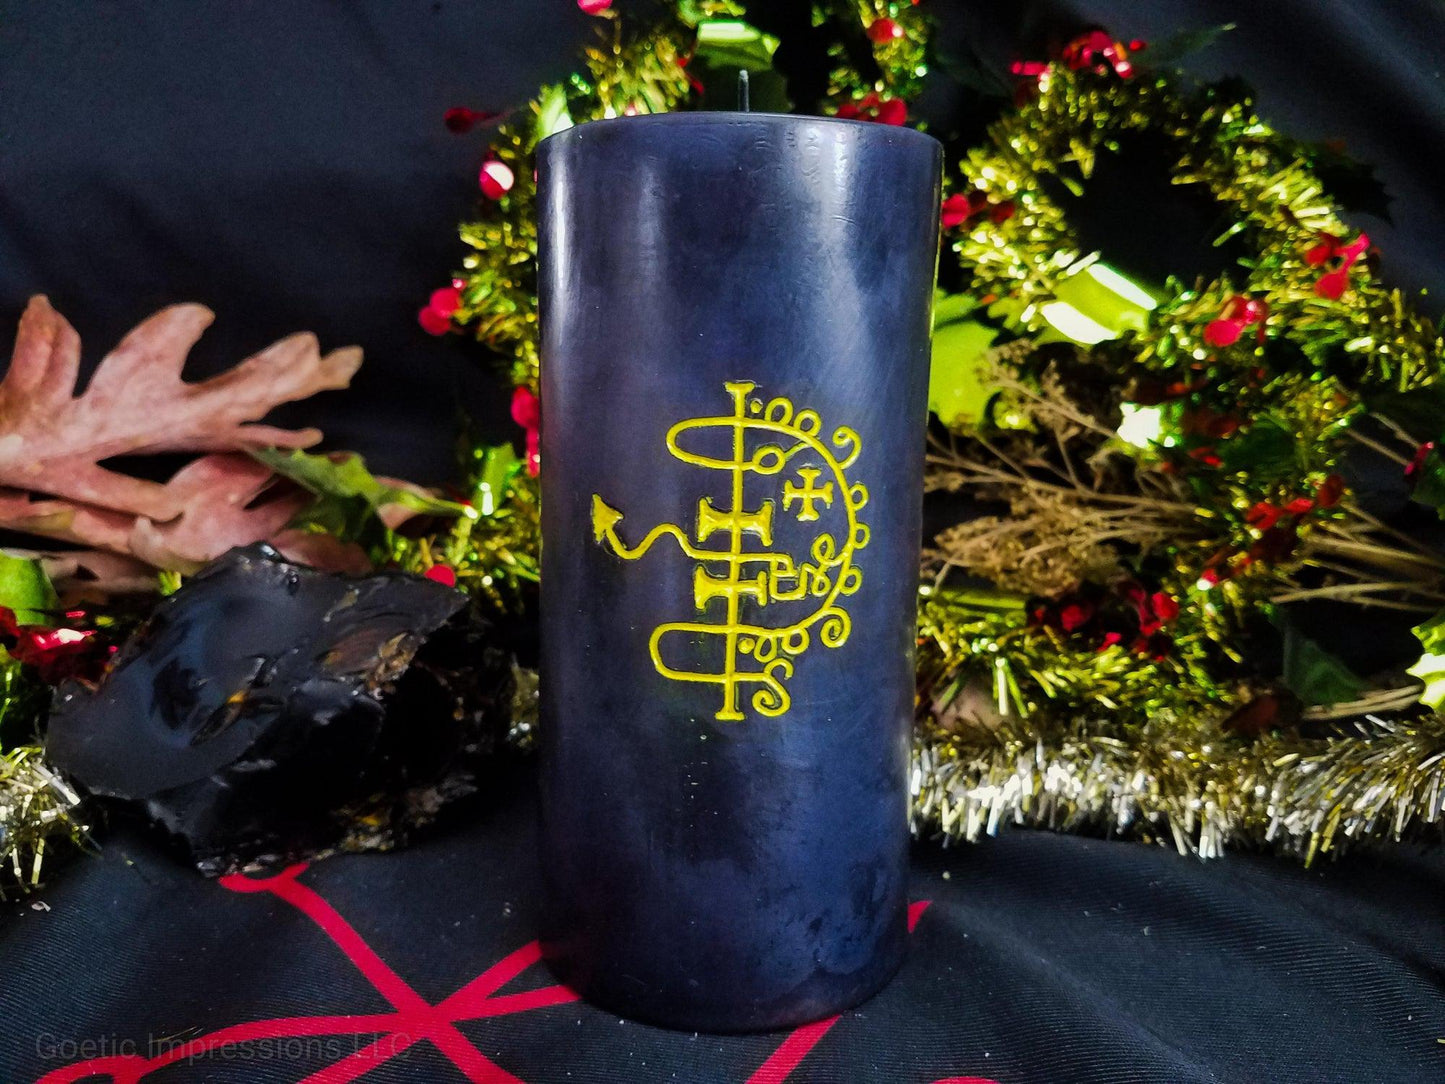 Black pillar candle with yellow Asmoday sigil carved in it